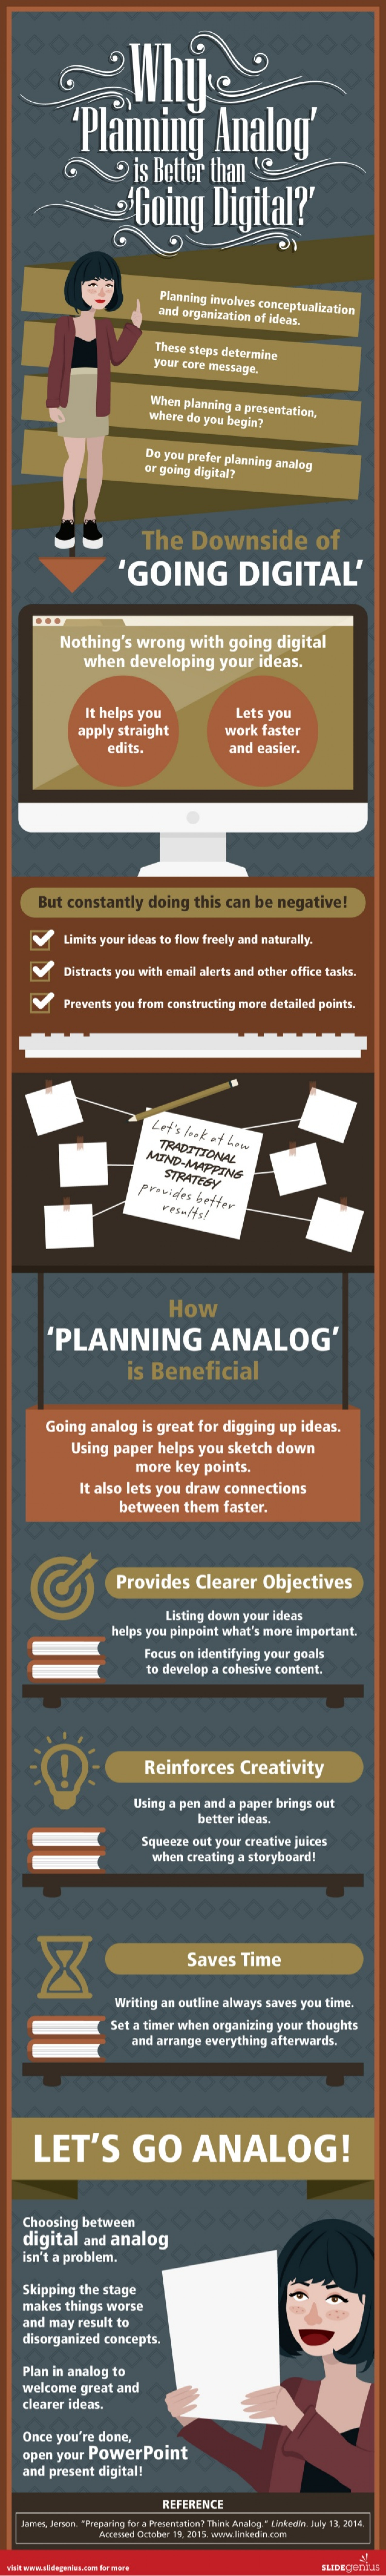 Why ‘Planning Analog’ is Better than ‘Going Digital?’ Infographic